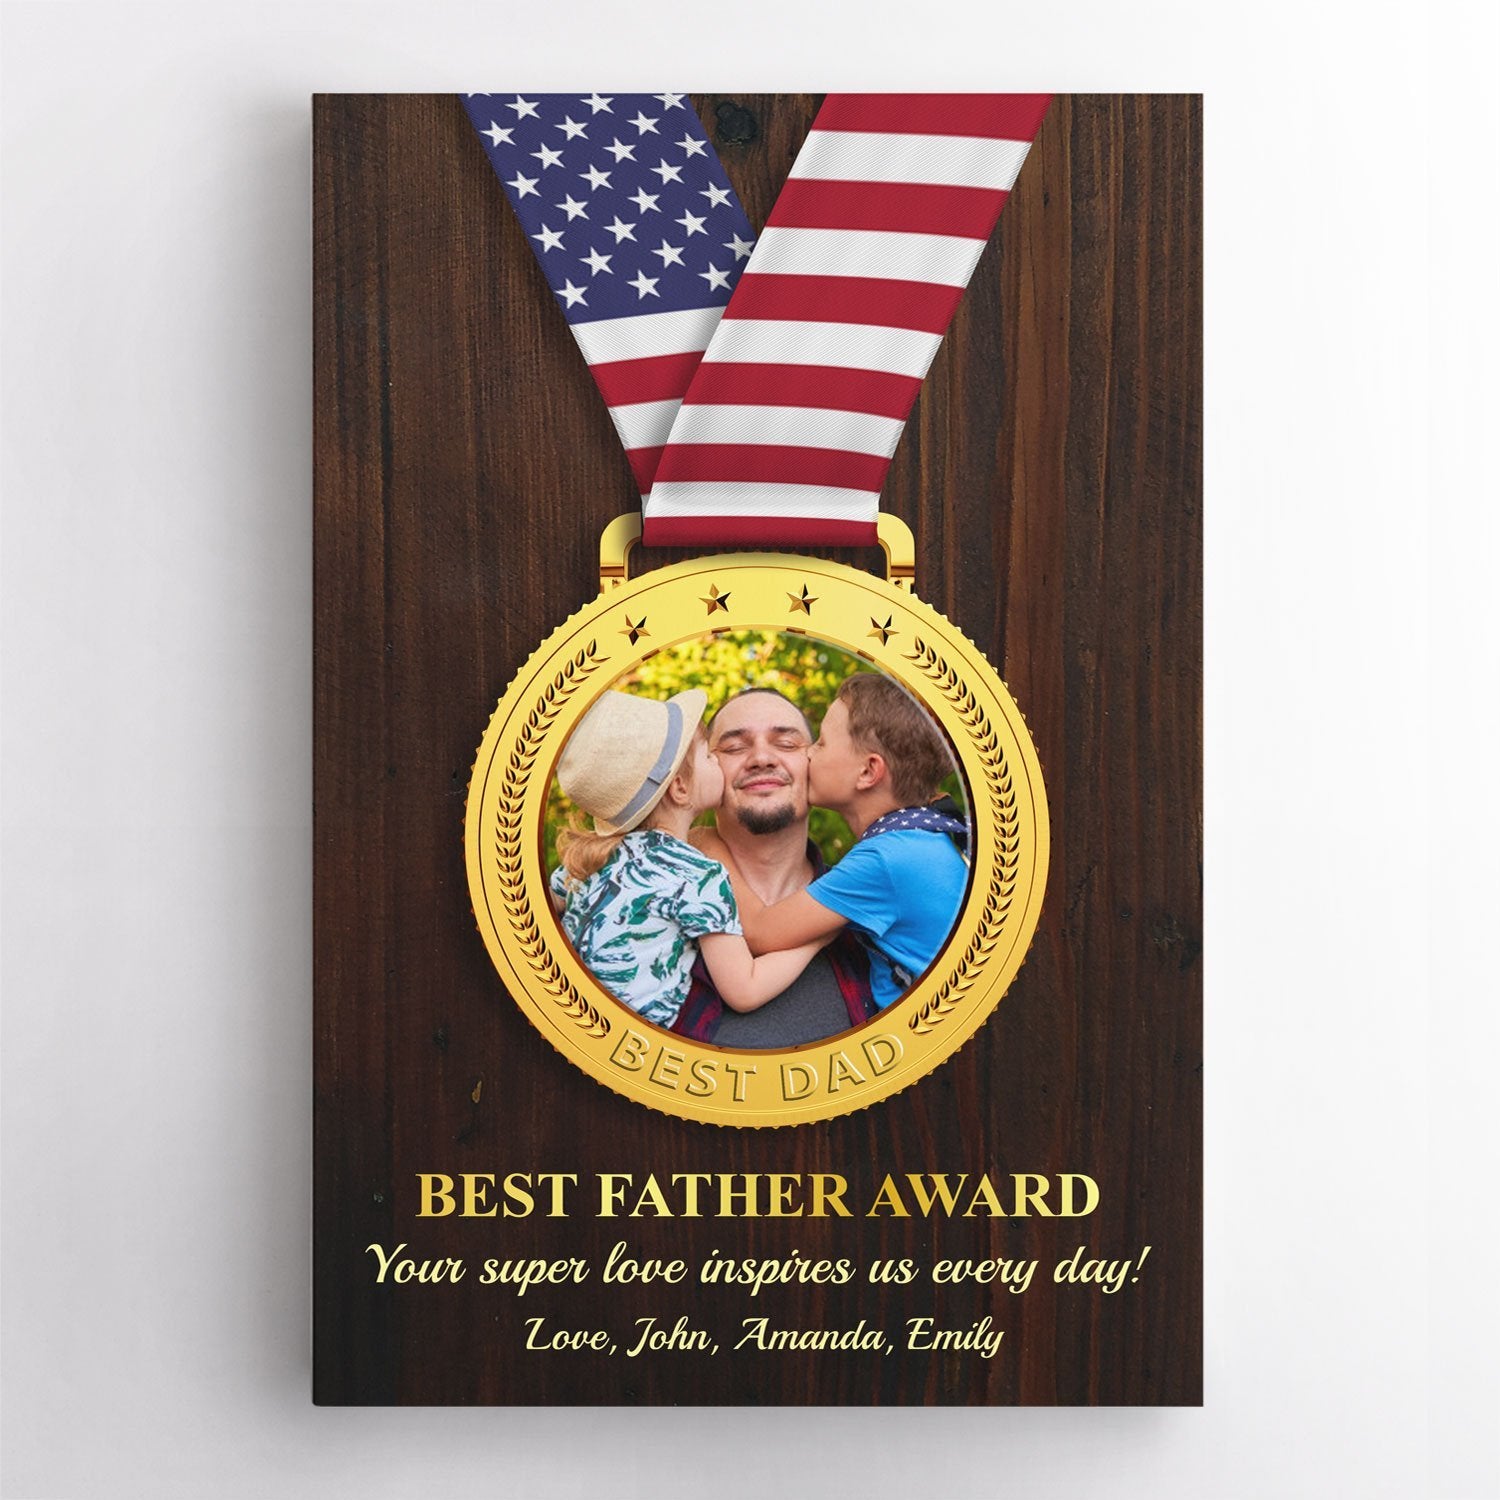 If you can’t afford a real gold medal, or your daddy already has a real one (that’s so great), you can give him a “Best Father reward canvas” this Father’s Day. Simply pick a touching image with him into the medal. Your daddy will proudly hang it right in his living room to show off to everyone.